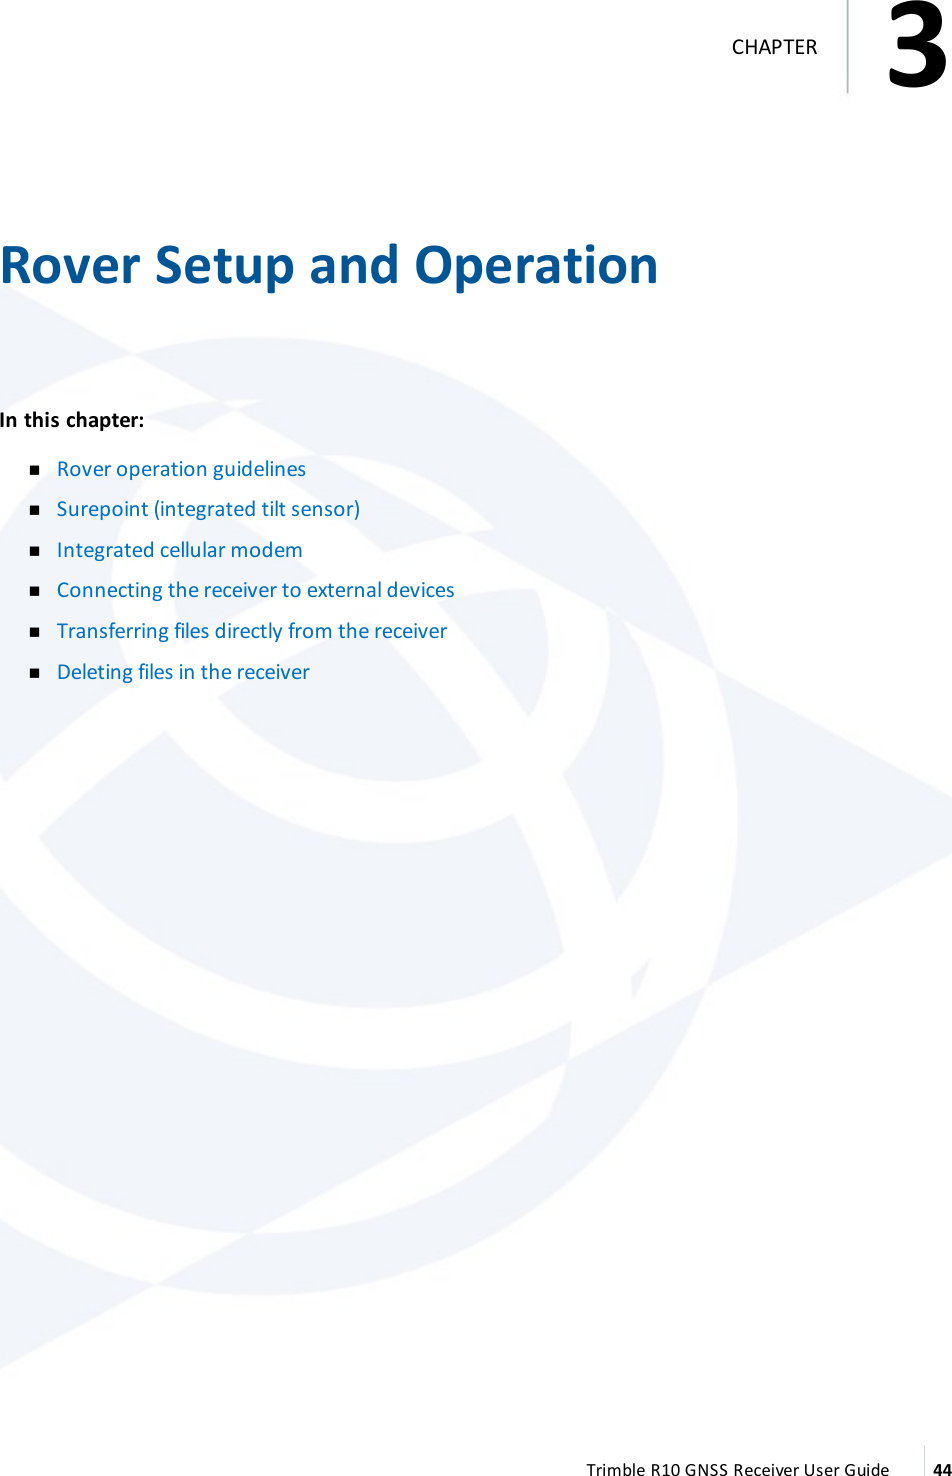 3   Rover Setup and OperationIn this chapter:   nRover operation guidelines nSurepoint (integrated tilt sensor) nIntegrated cellular modem nConnecting the receiver to external devices nTransferring files directly from the receiver nDeleting files in the receiver Trimble R10 GNSS Receiver User Guide 443CHAPTER